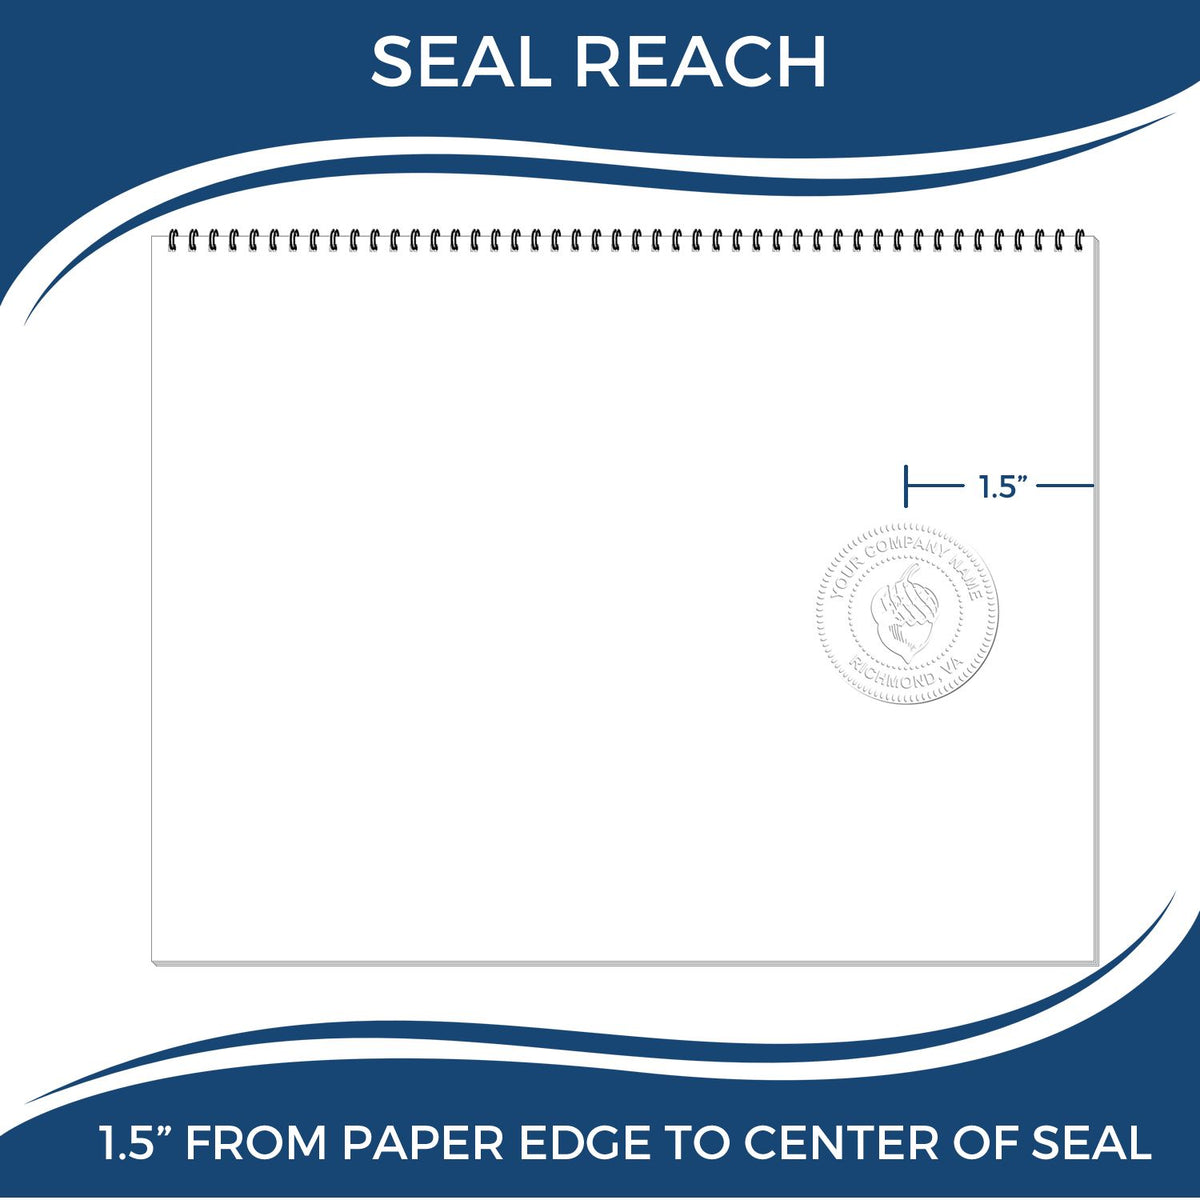 An infographic showing the seal reach which is represented by a ruler and a miniature seal image of the Hybrid Kansas Land Surveyor Seal